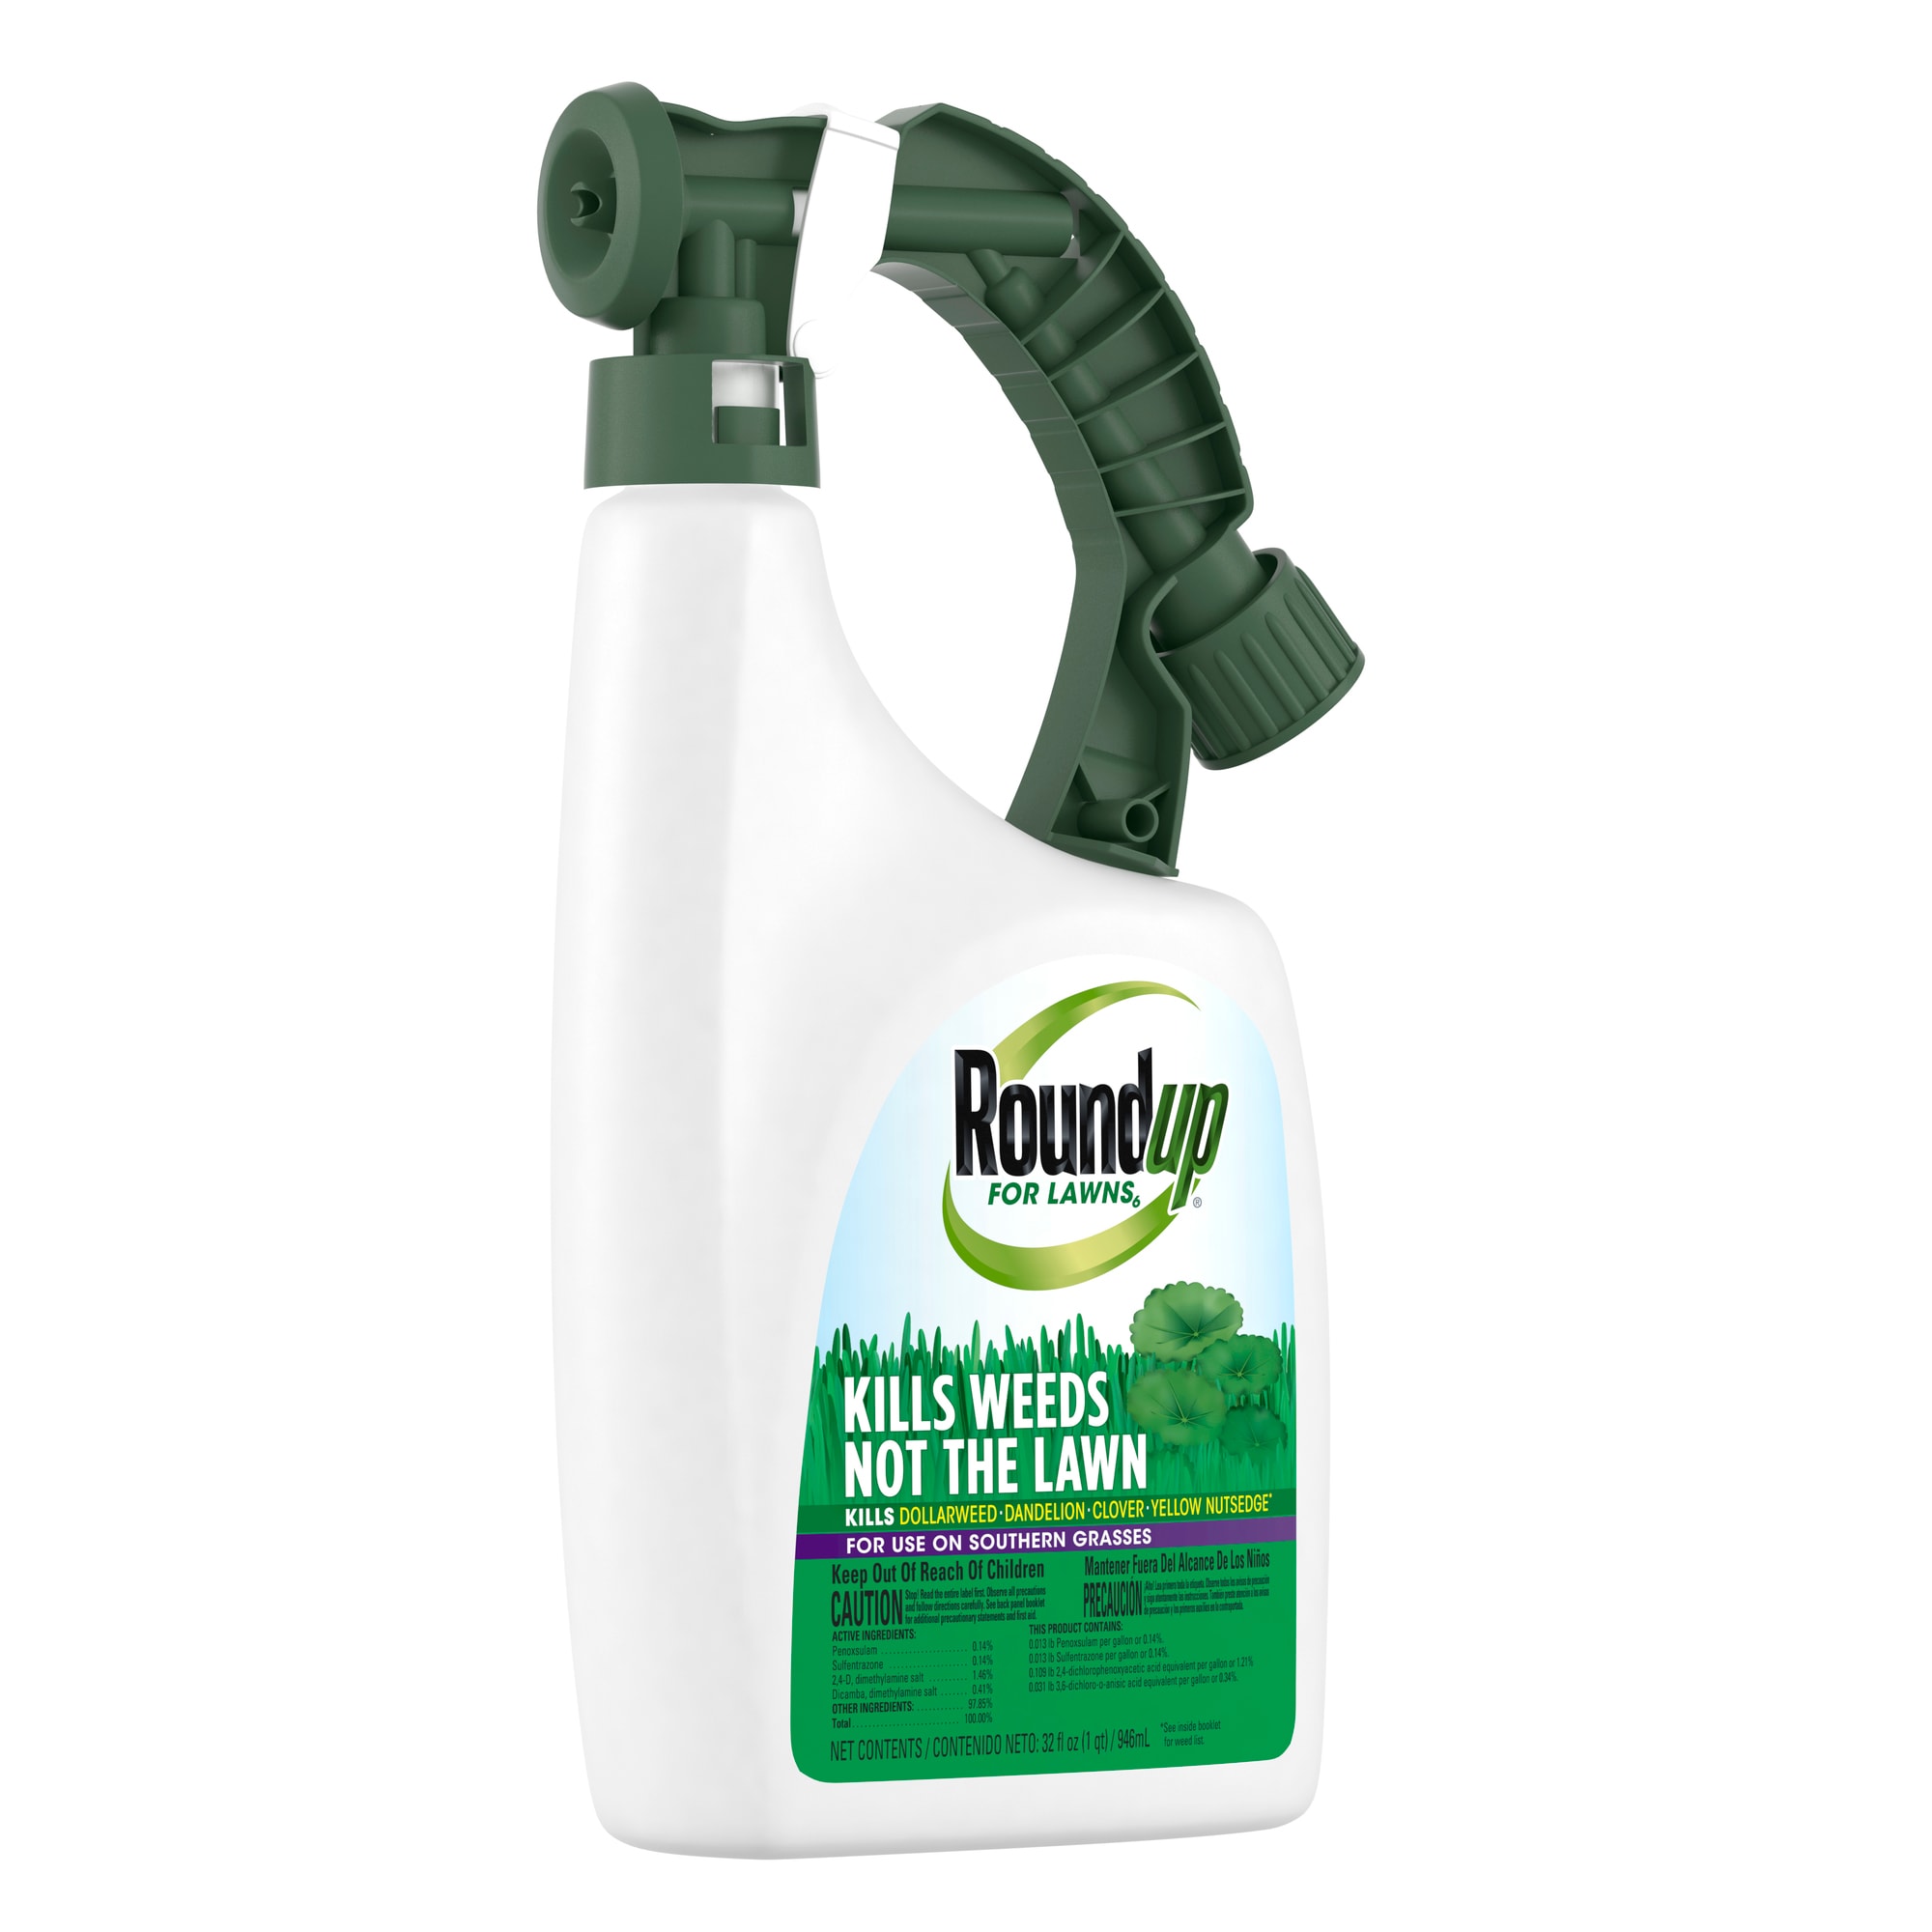 Roundup For Lawns 32-oz Hose End Sprayer Lawn Killer in Weed Killers department at Lowes.com